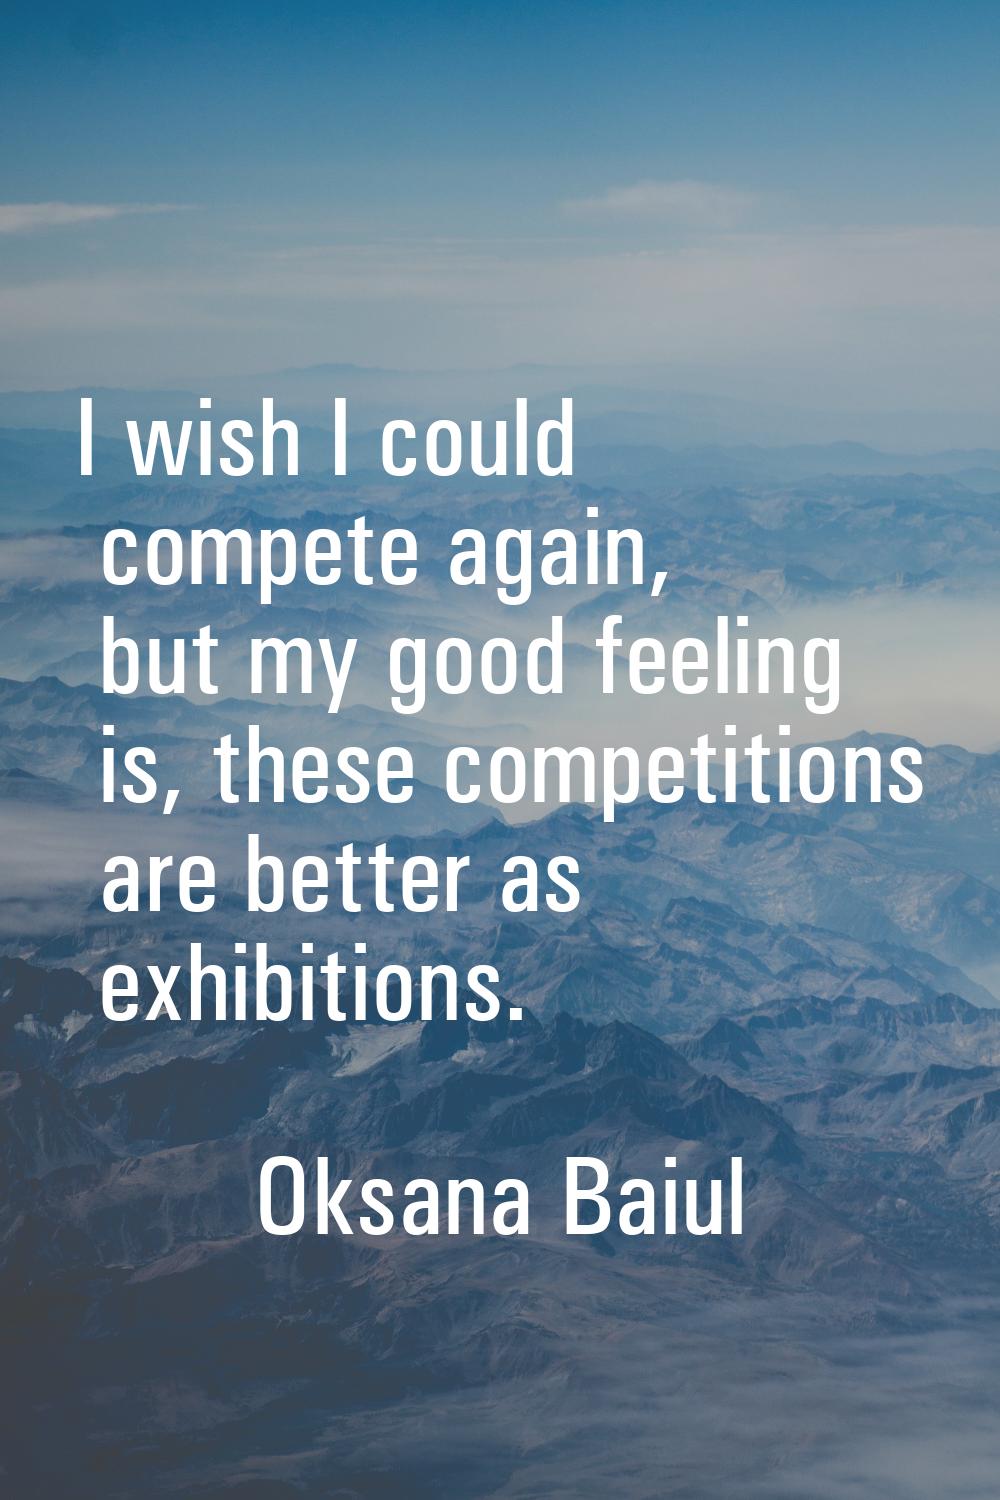 I wish I could compete again, but my good feeling is, these competitions are better as exhibitions.